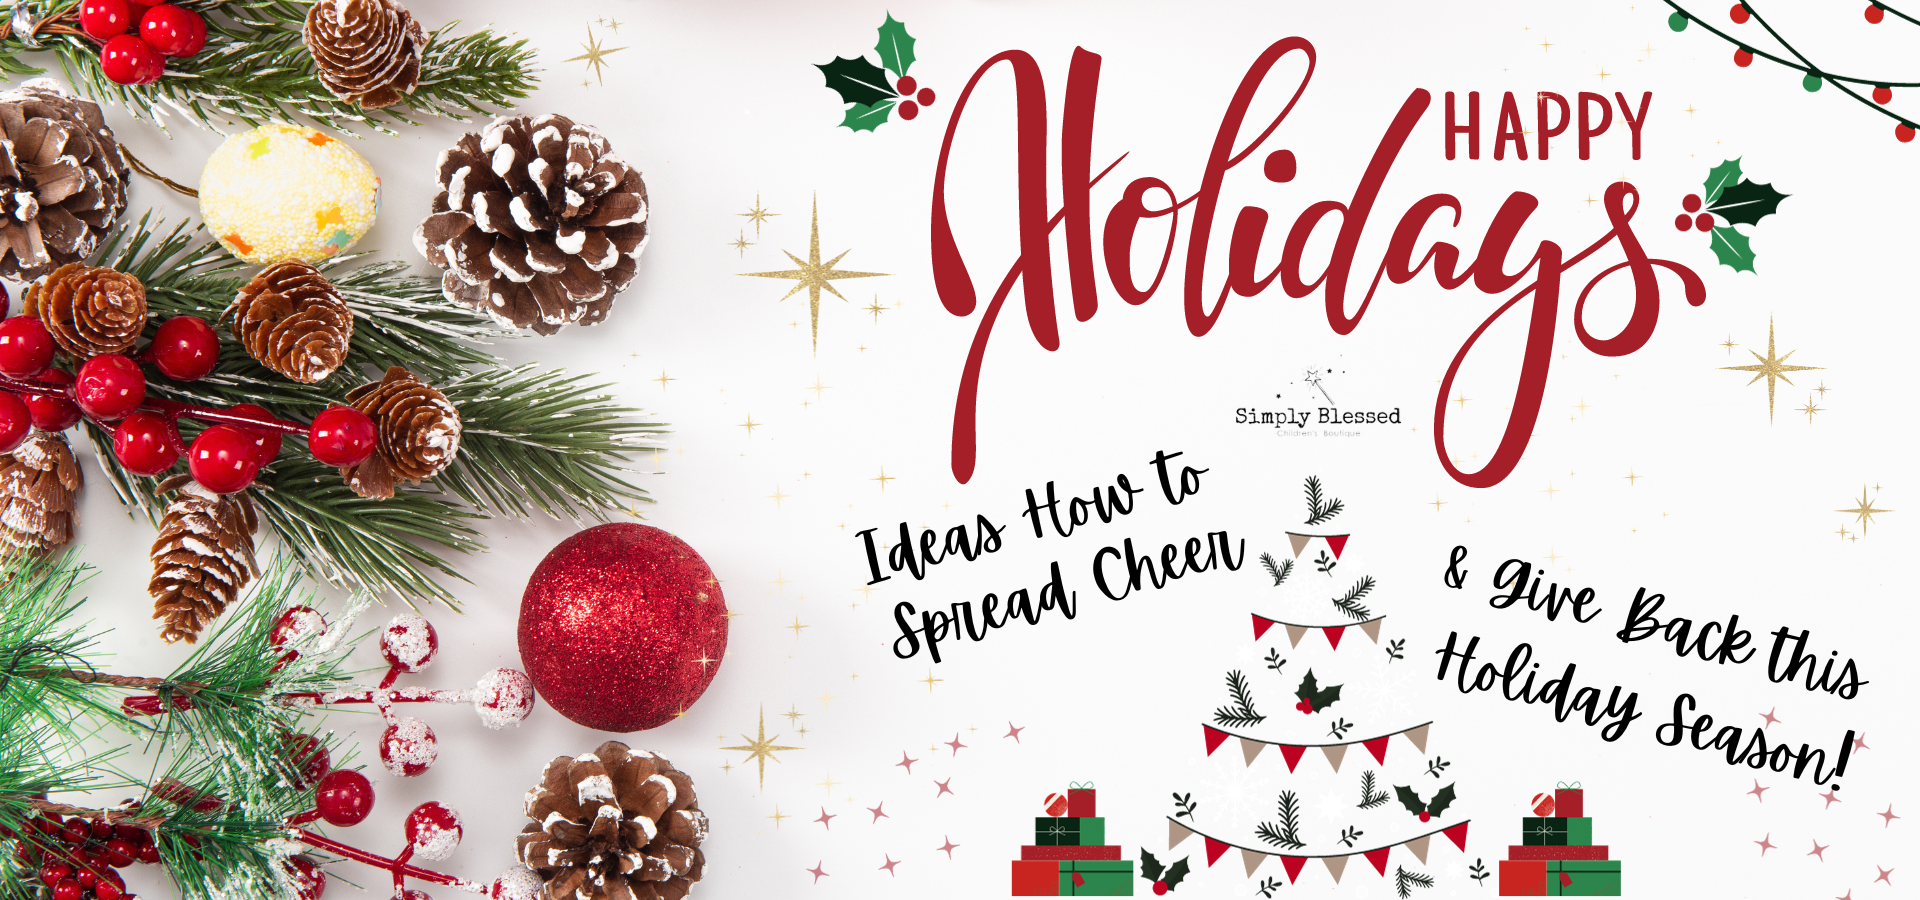 Ideas for Spreading Cheer & Giving Back this Holiday Season!